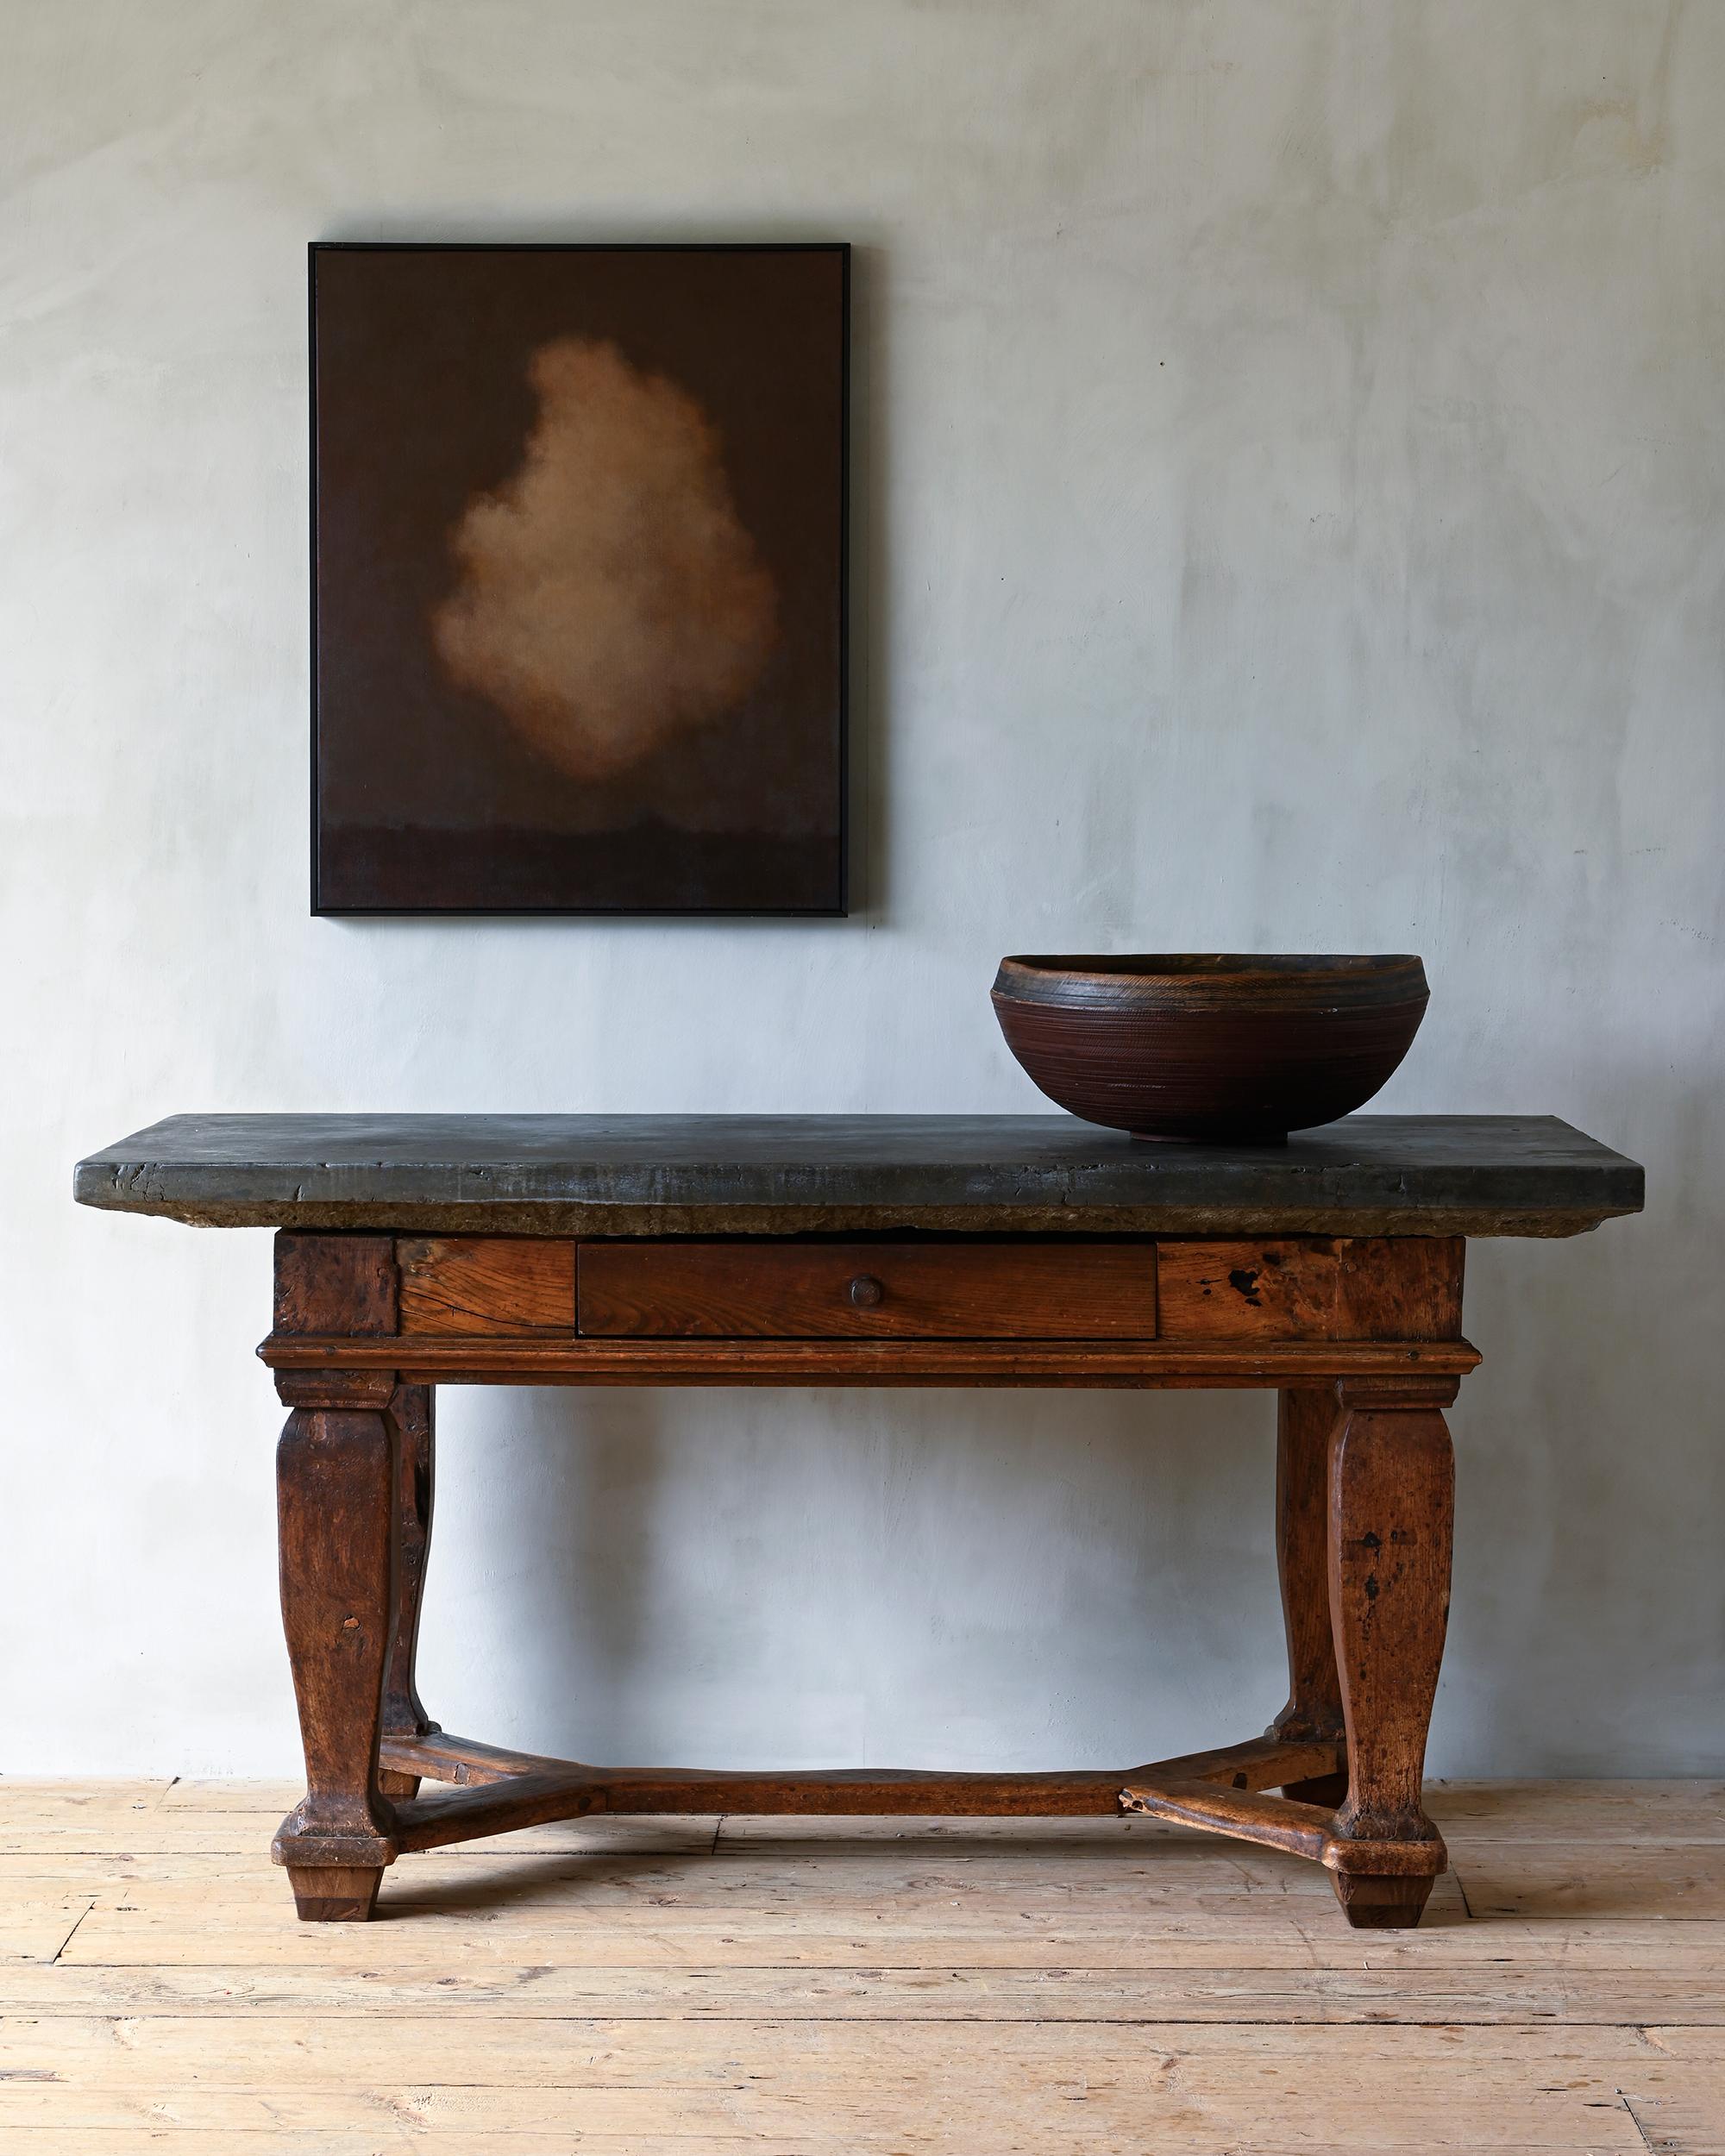 Fine 18th century Swedish Baroque (Komstad) limestone top table with one drawer to the front and baluster-shaped legs joined by y-stretcher. Works excellent as a centre table as well, Sweden, circa 1750.

The antique Komstad limestone top has